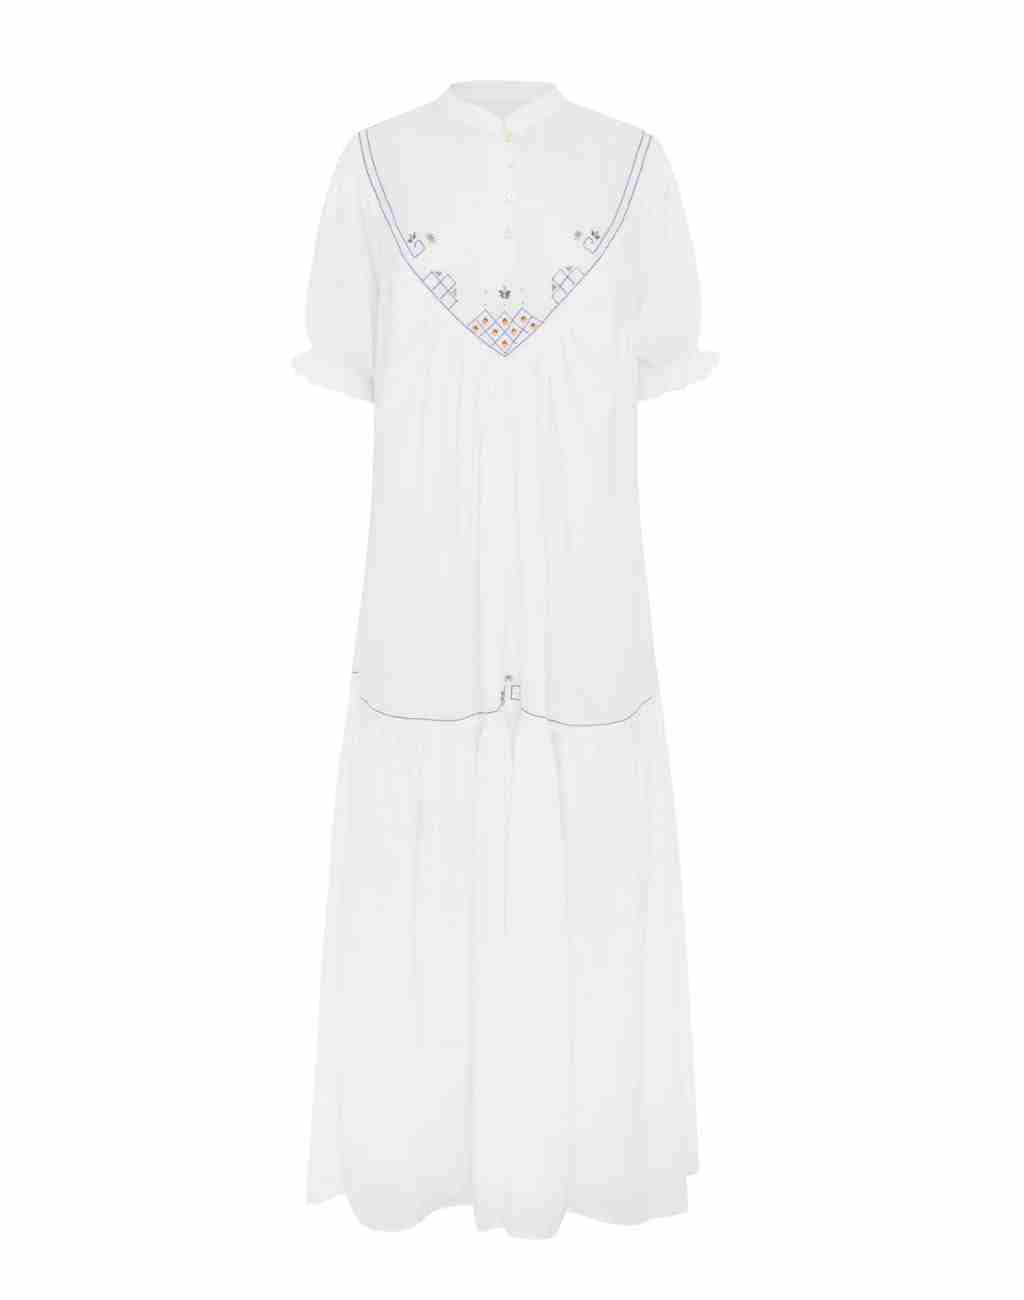 Bowie Embroidered Maxi Dress | Feminine and Free Spirited